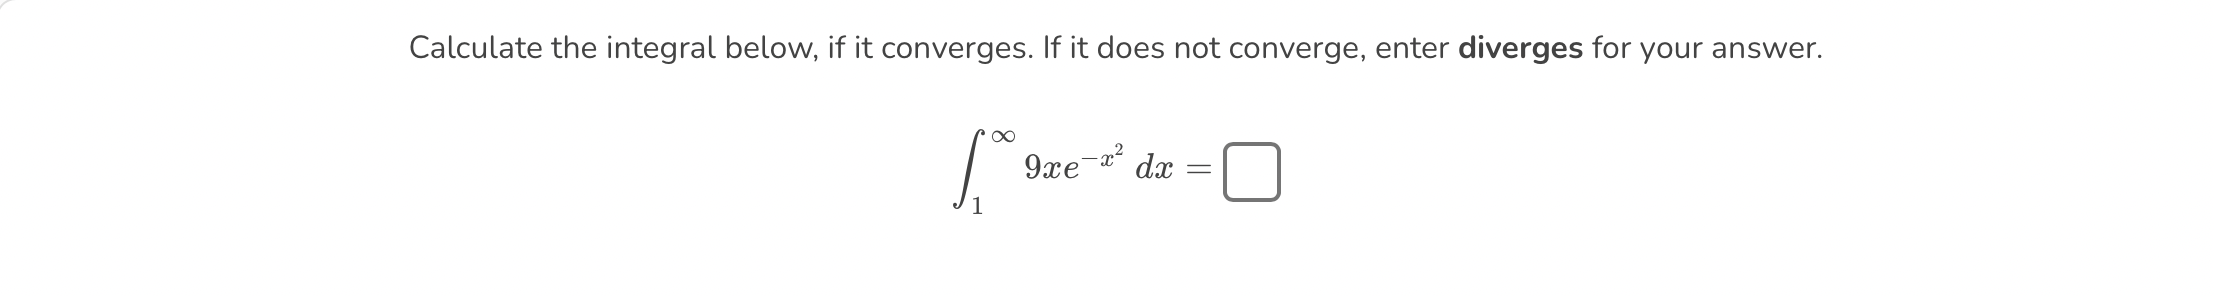 Calculate the integral below, if it converges. If it does not converge, enter diverges for your answer.
\[
\int_{1}^{\infty}